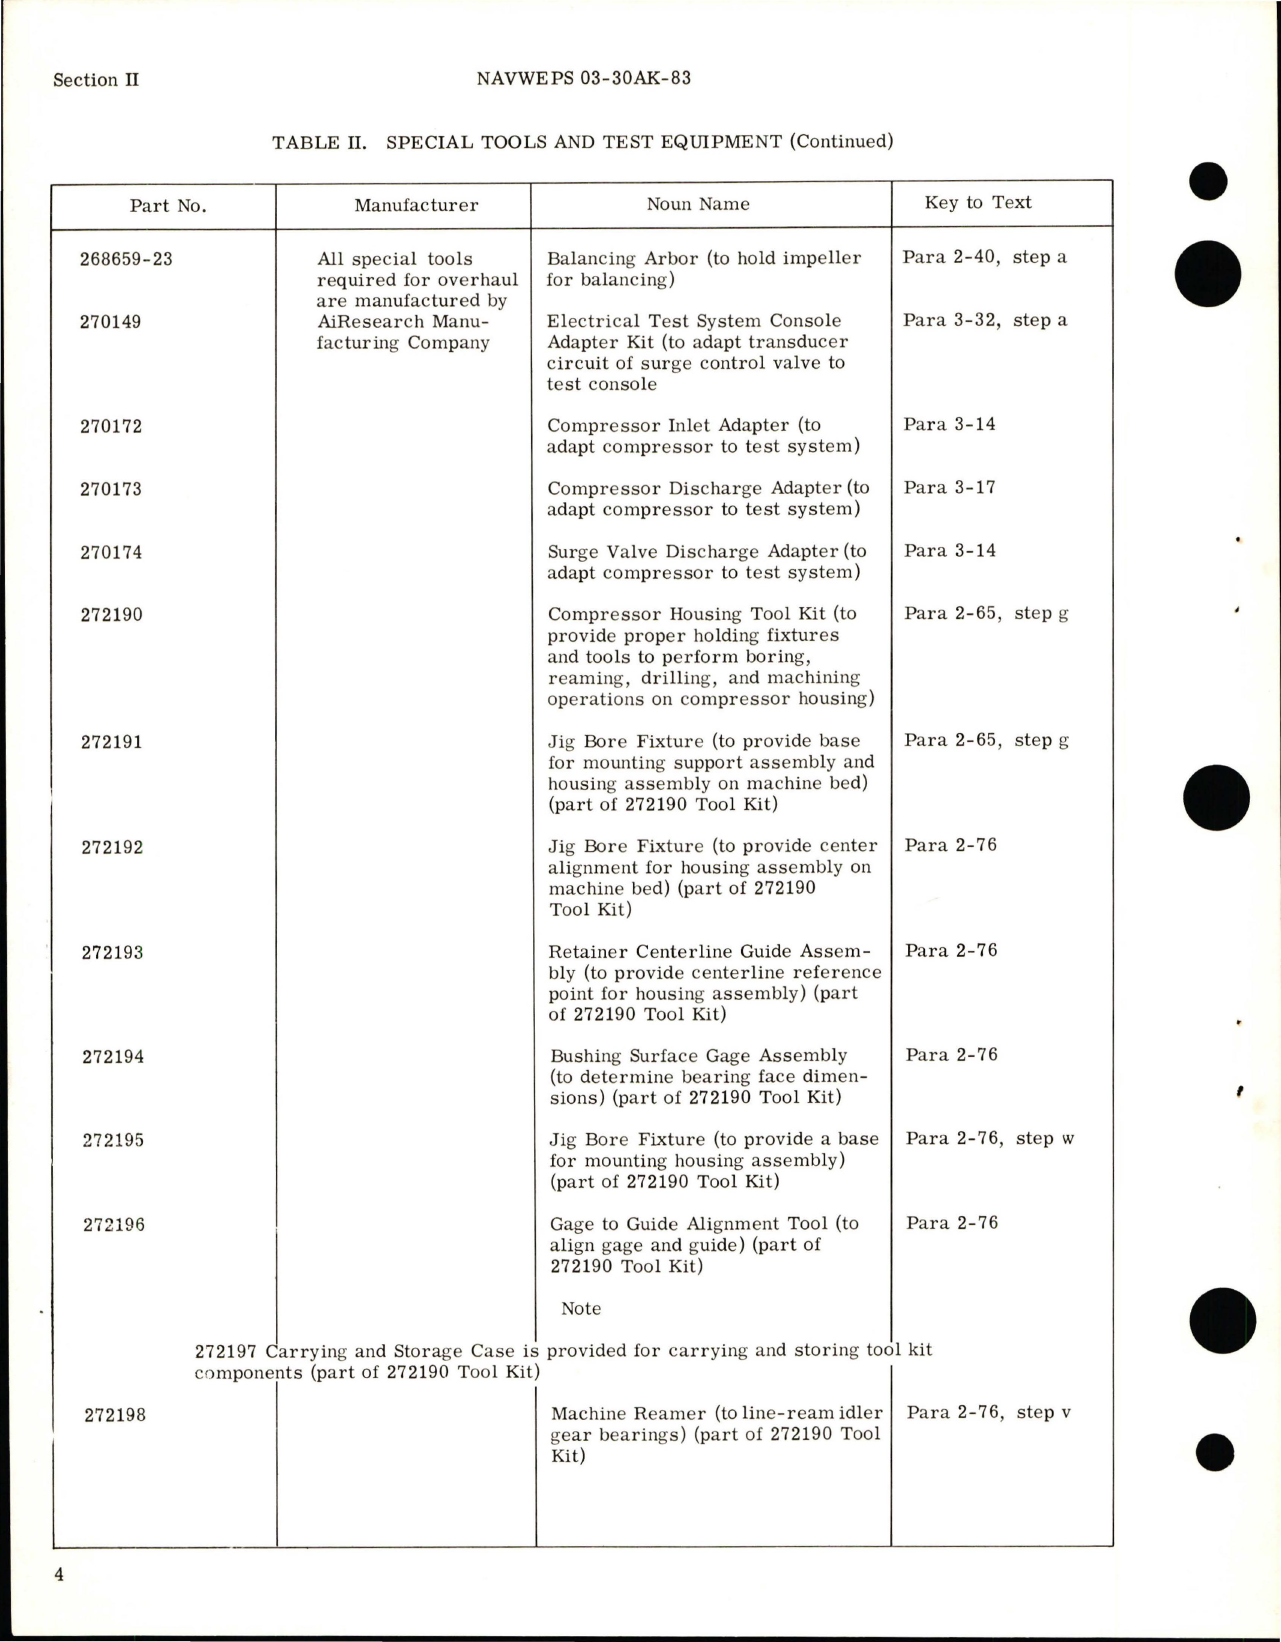 Sample page 8 from AirCorps Library document: Overhaul Instructions for Centrifugal Air Compressor - Parts 206400-1, 206400-1-6, 206400-1-7, and 206400-1-8